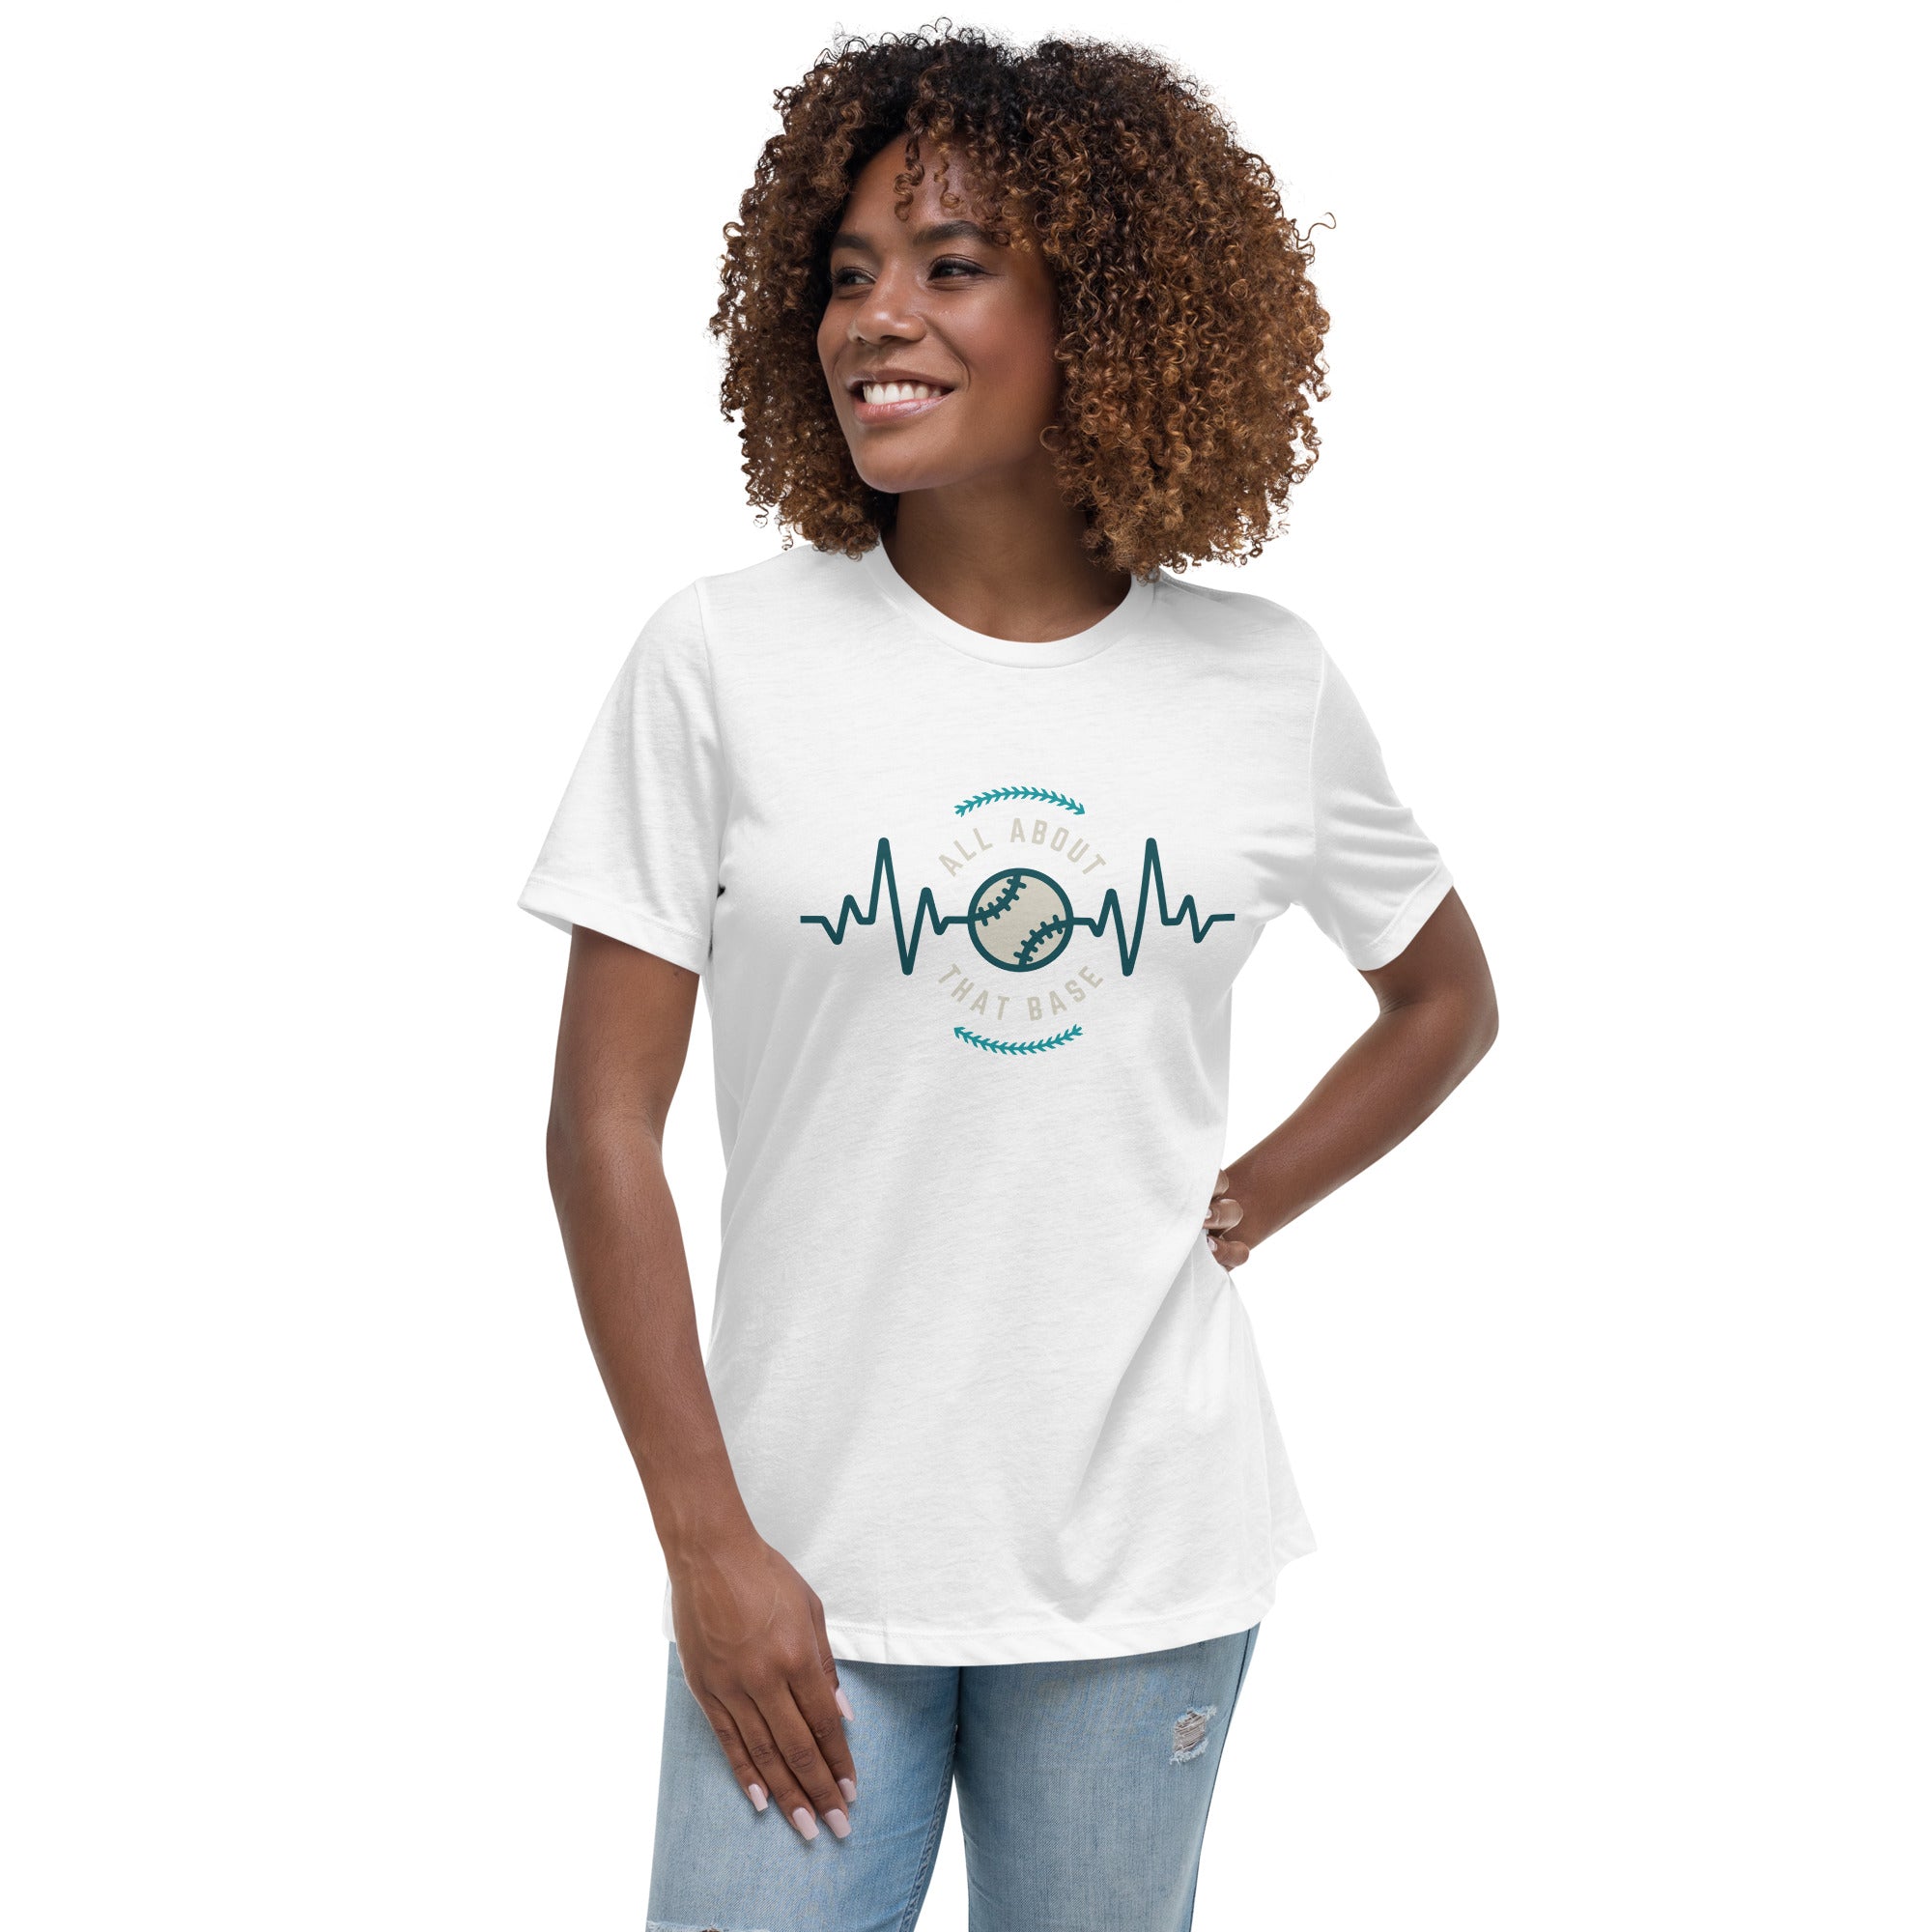 All About That Base Women's Premium T-Shirt